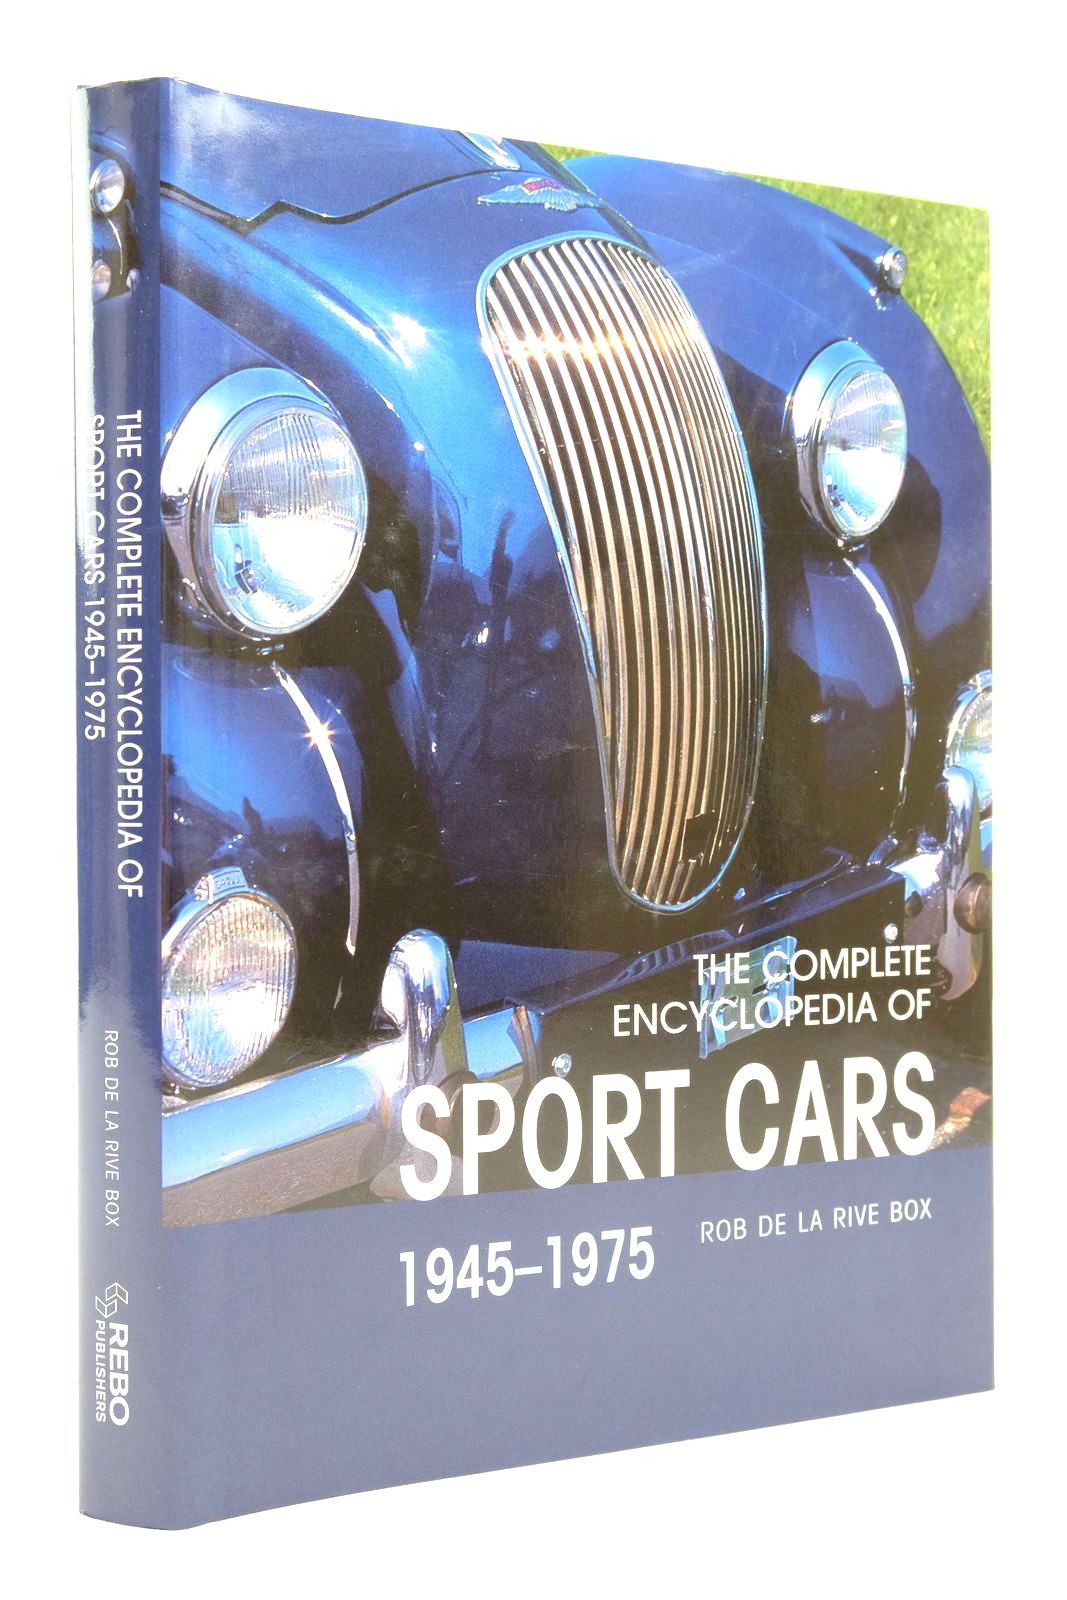 Photo of THE COMPLETE ENCYCLOPEDIA OF SPORT CARS 1945-1975 written by De La Rive Box, Rob published by Rebo Publishers (STOCK CODE: 2139869)  for sale by Stella & Rose's Books